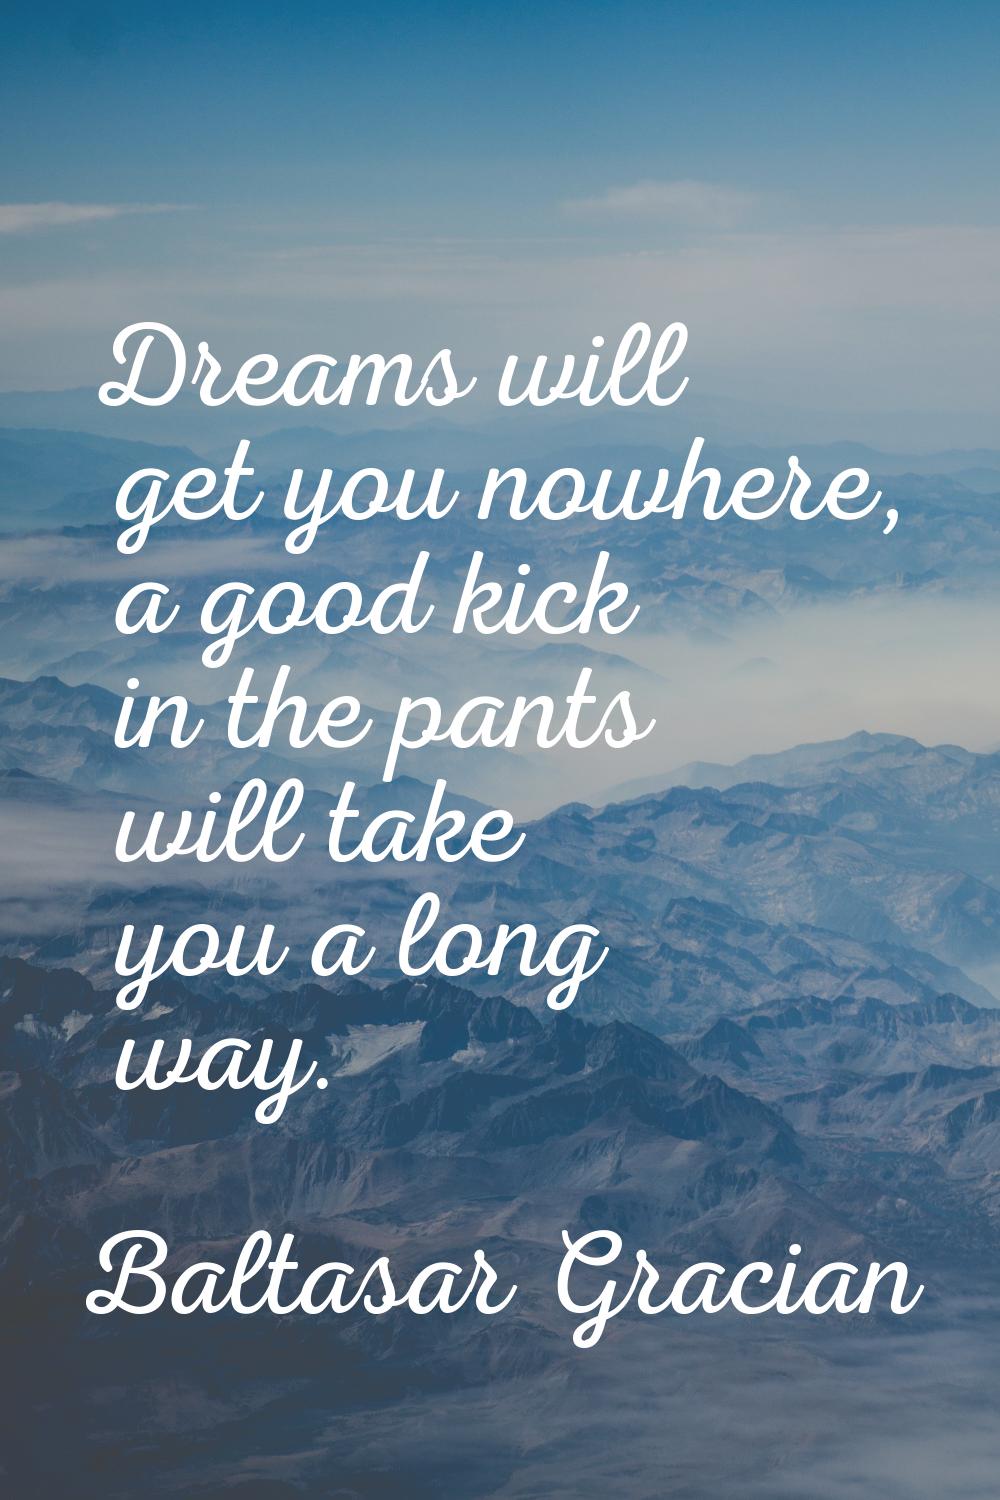 Dreams will get you nowhere, a good kick in the pants will take you a long way.